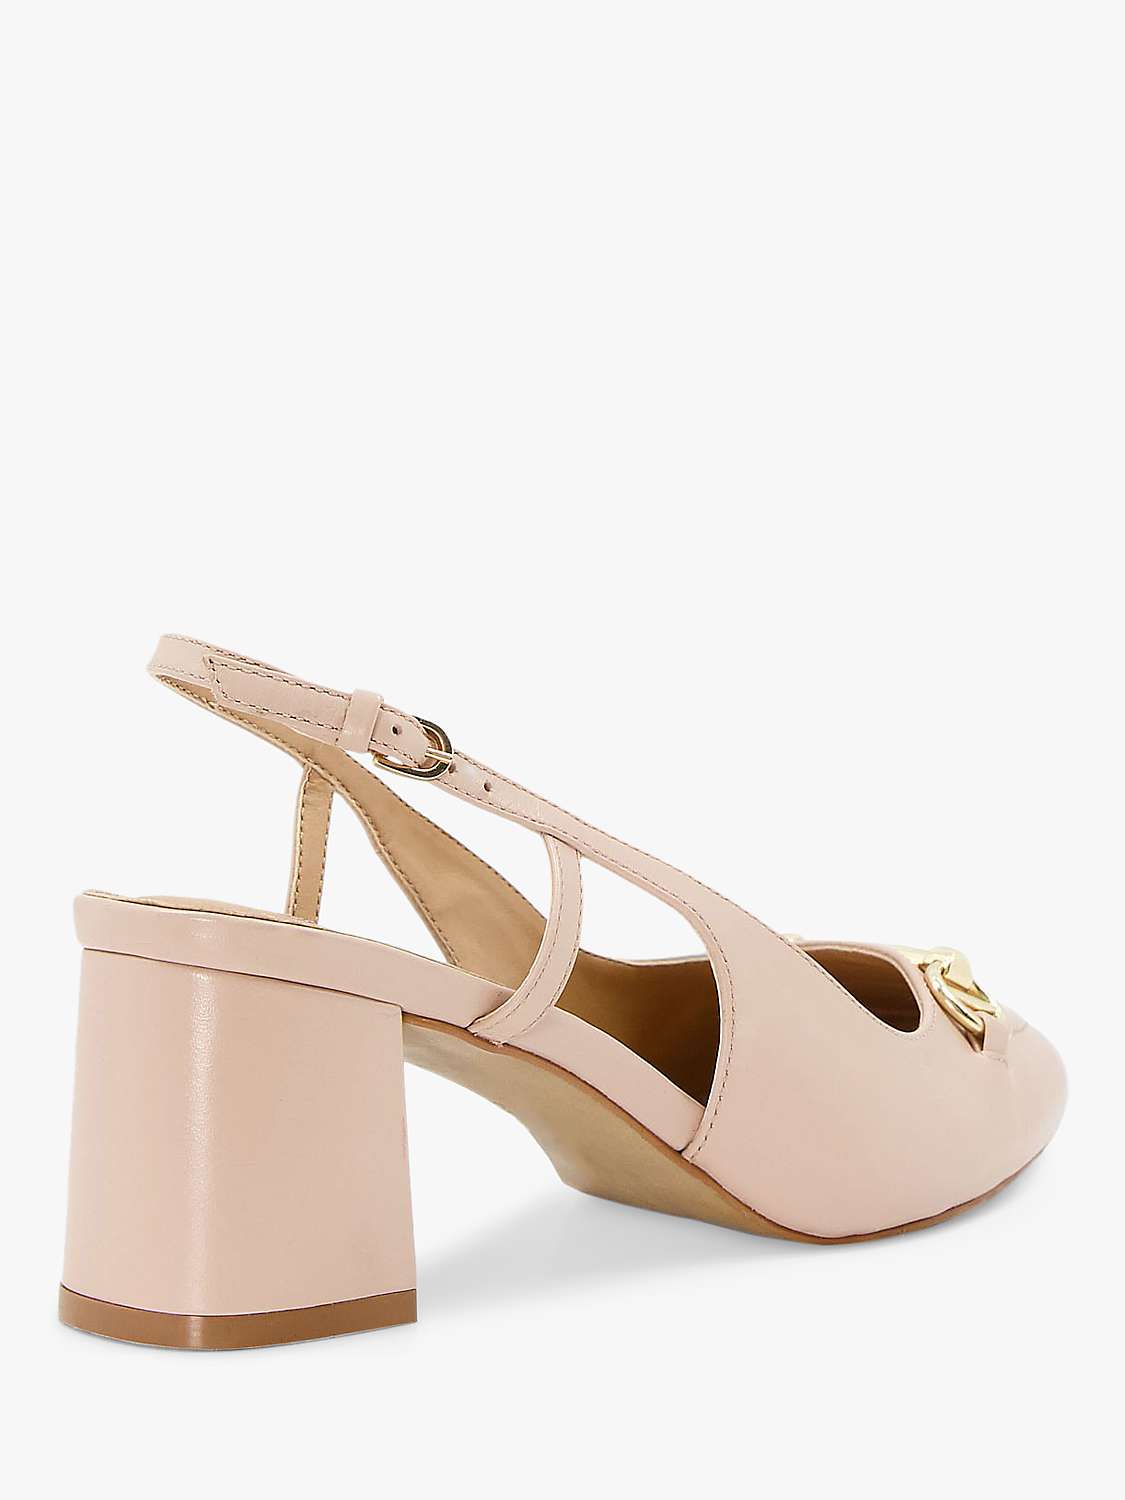 Dune Wide Fit Cassie Leather Slingback Court Shoes, Nude at John Lewis ...